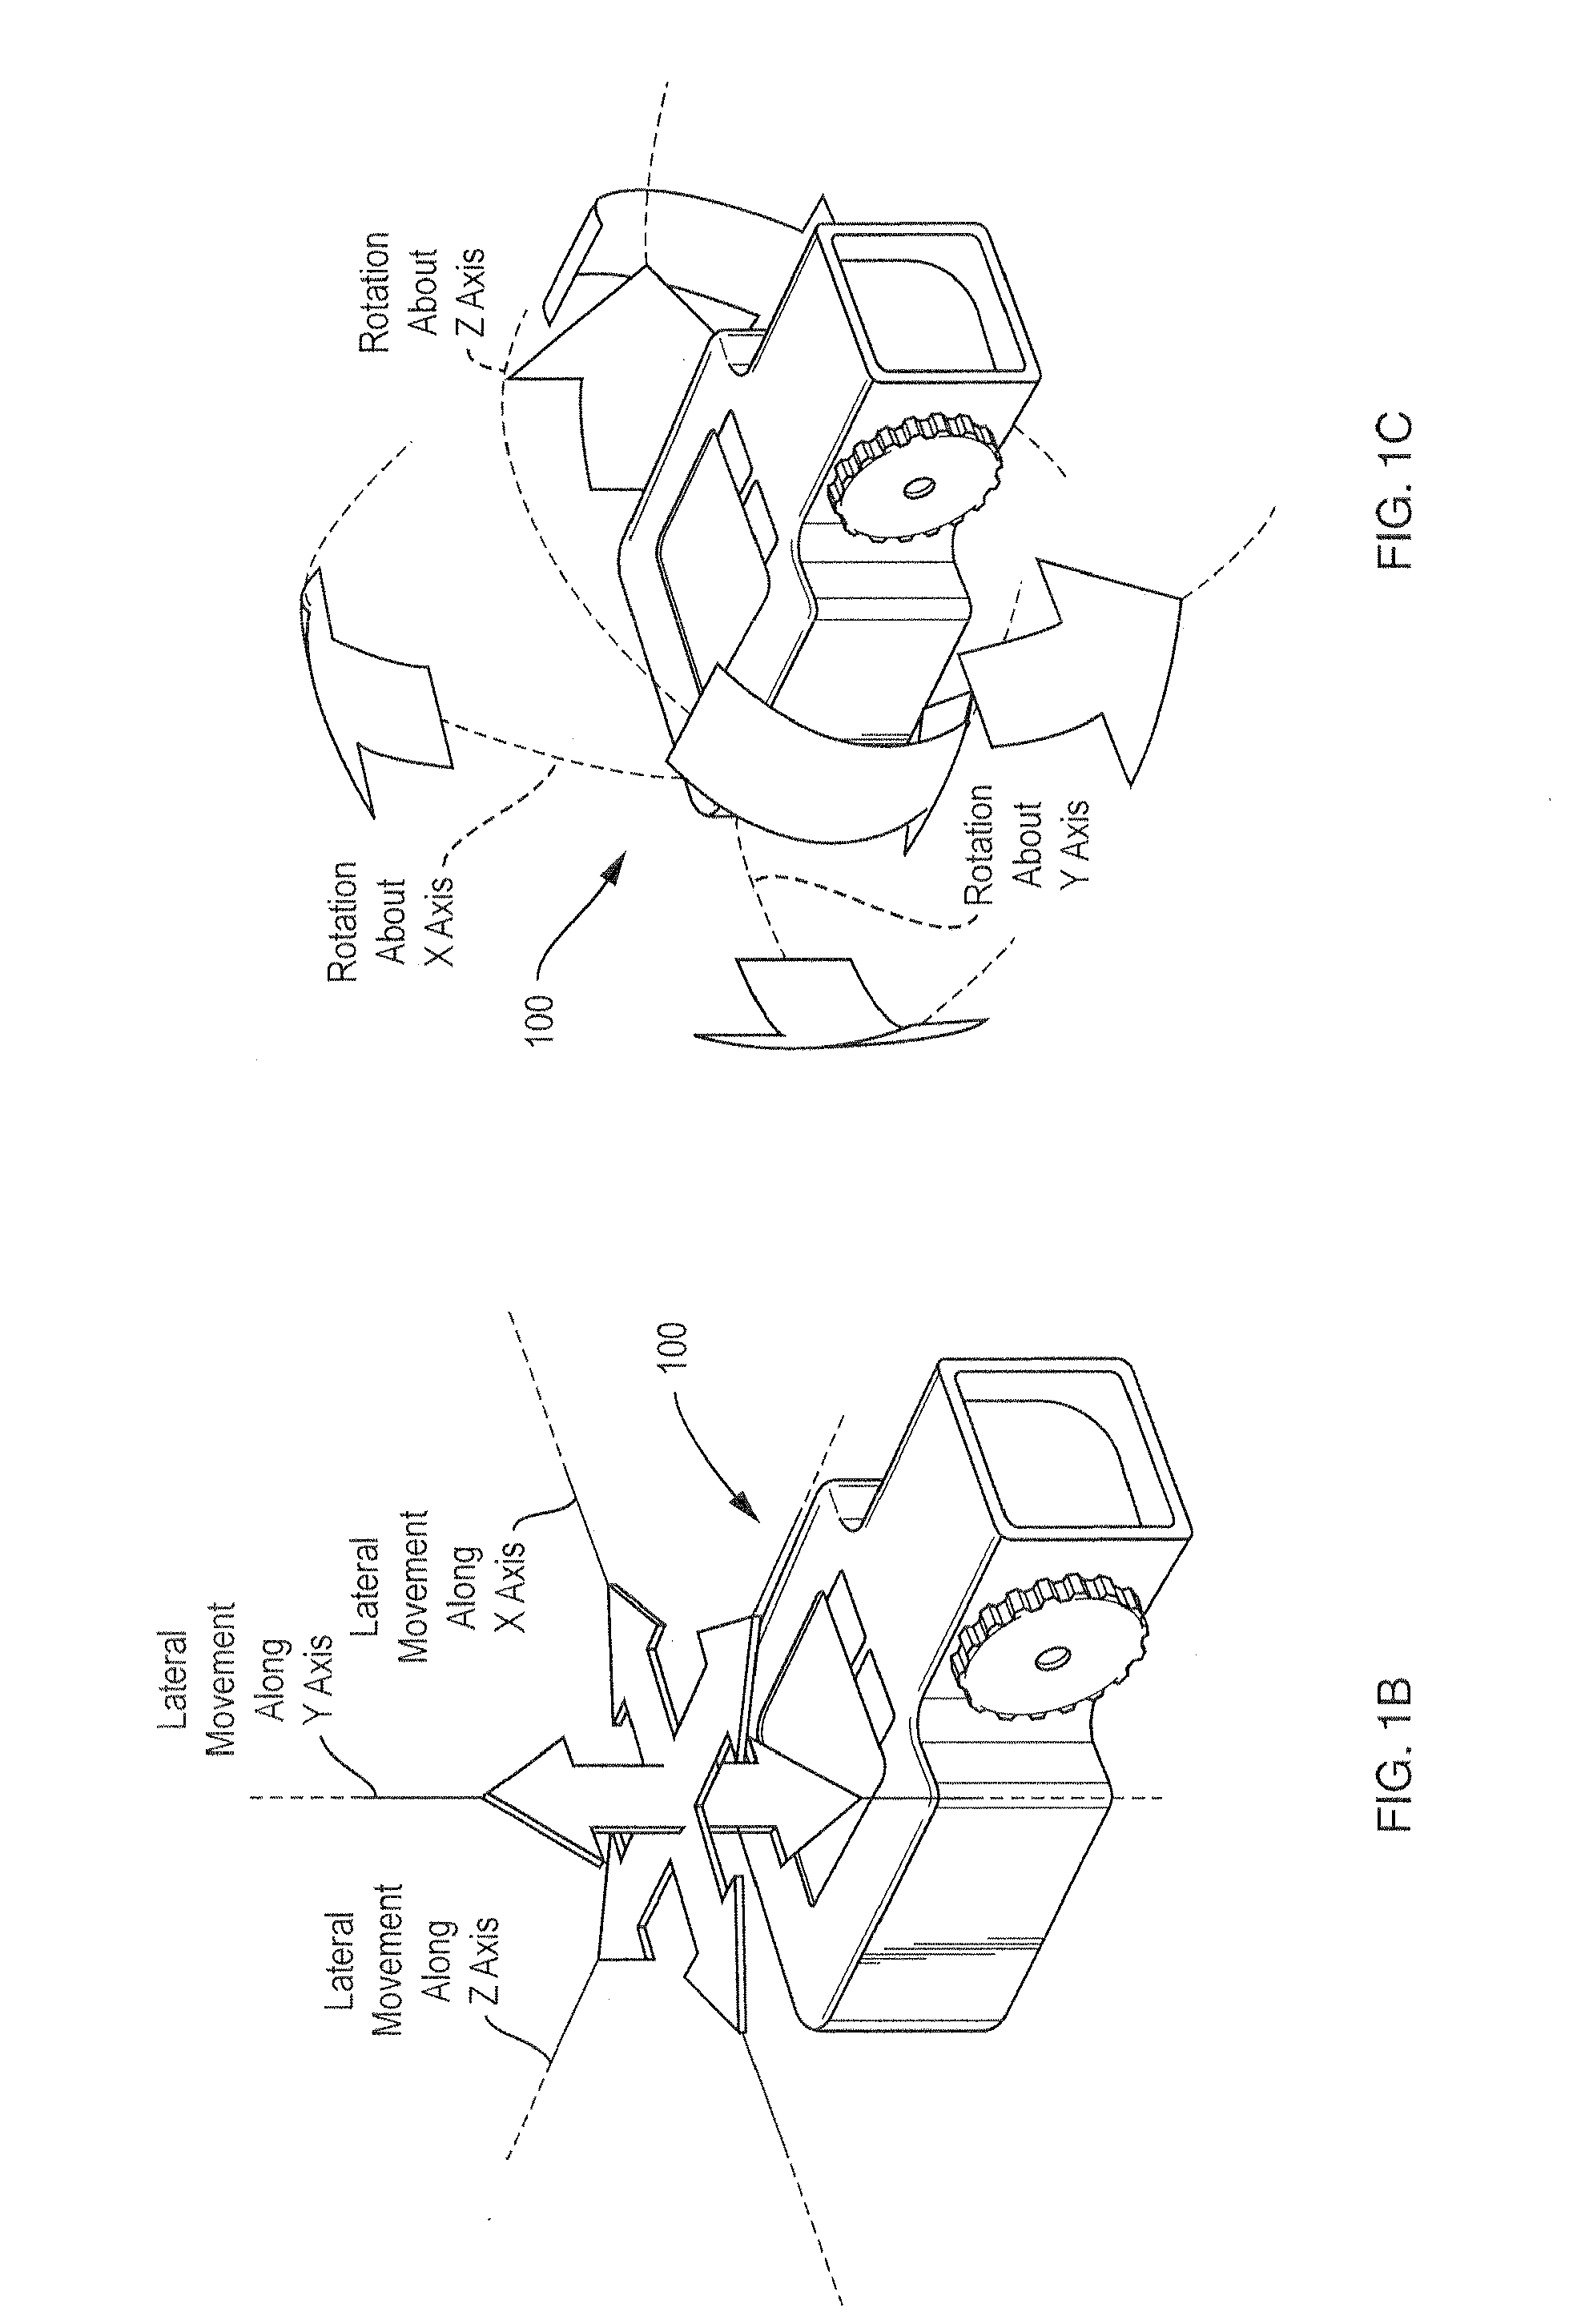 Handheld wireless display device having high-resolution display suitable for use as a mobile internet device